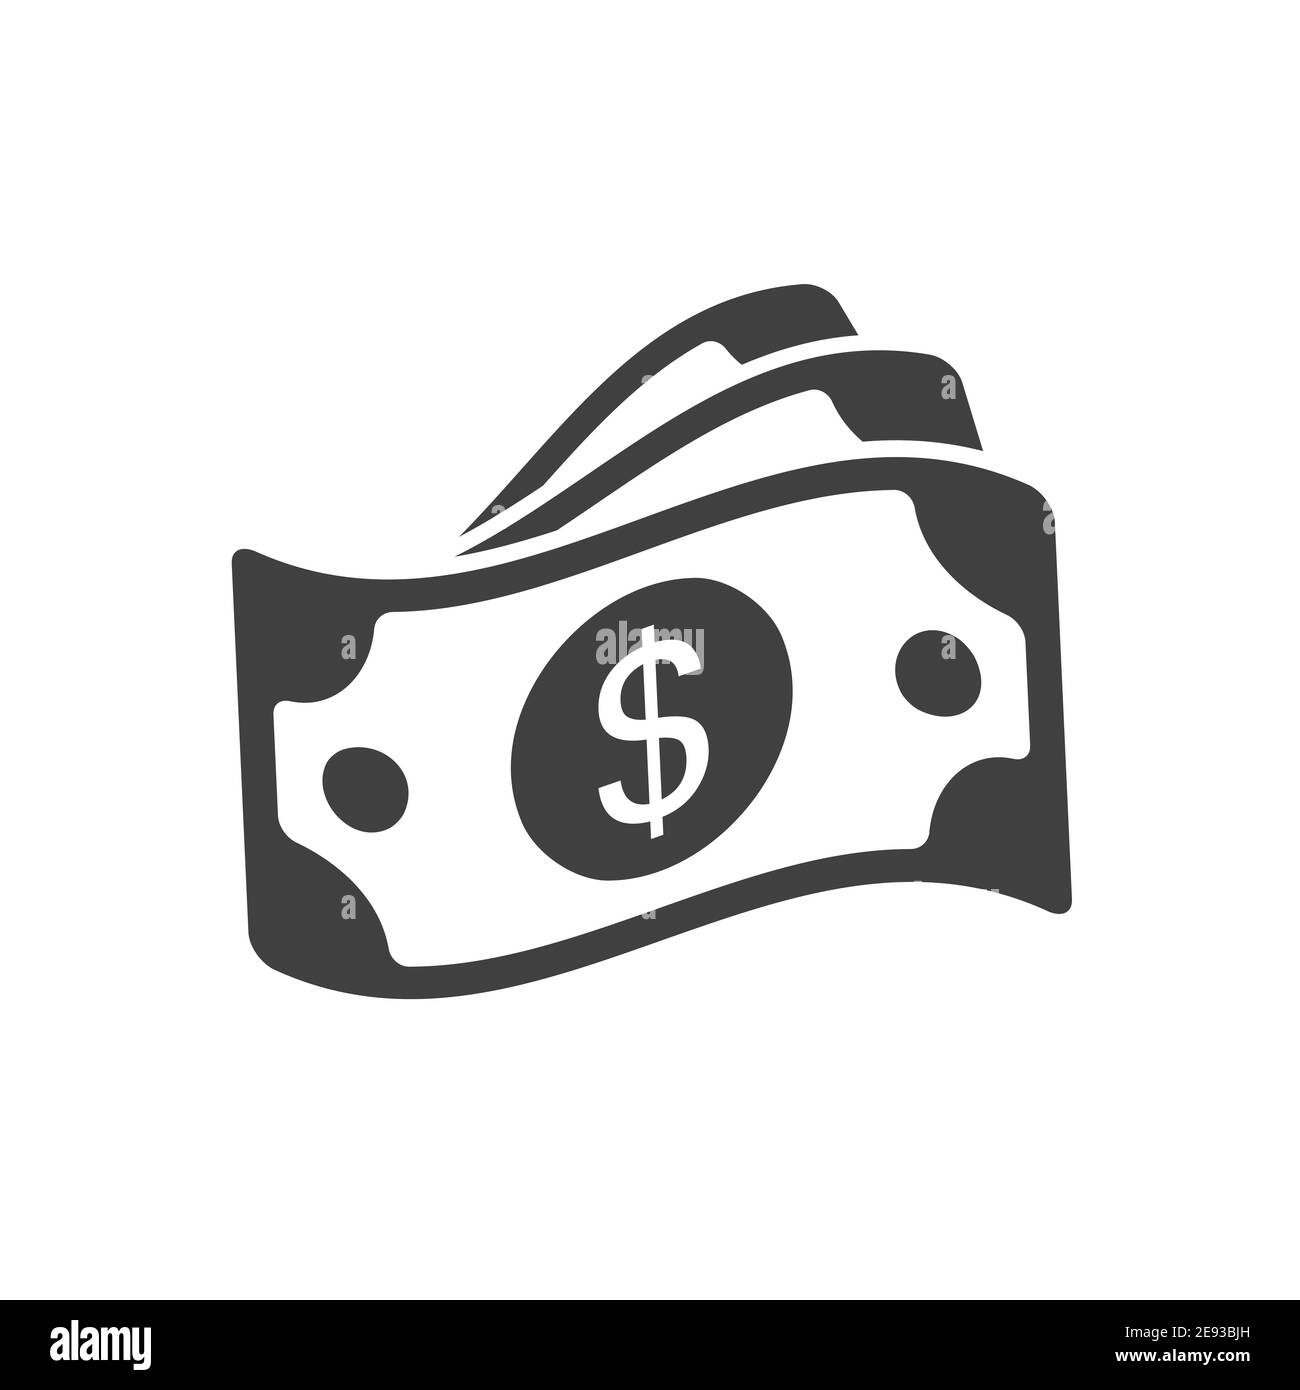 Dollar cash icon. Currency symbol. Black money silhouette in flat style. Vector illustration isolated on white background. Stock Vector